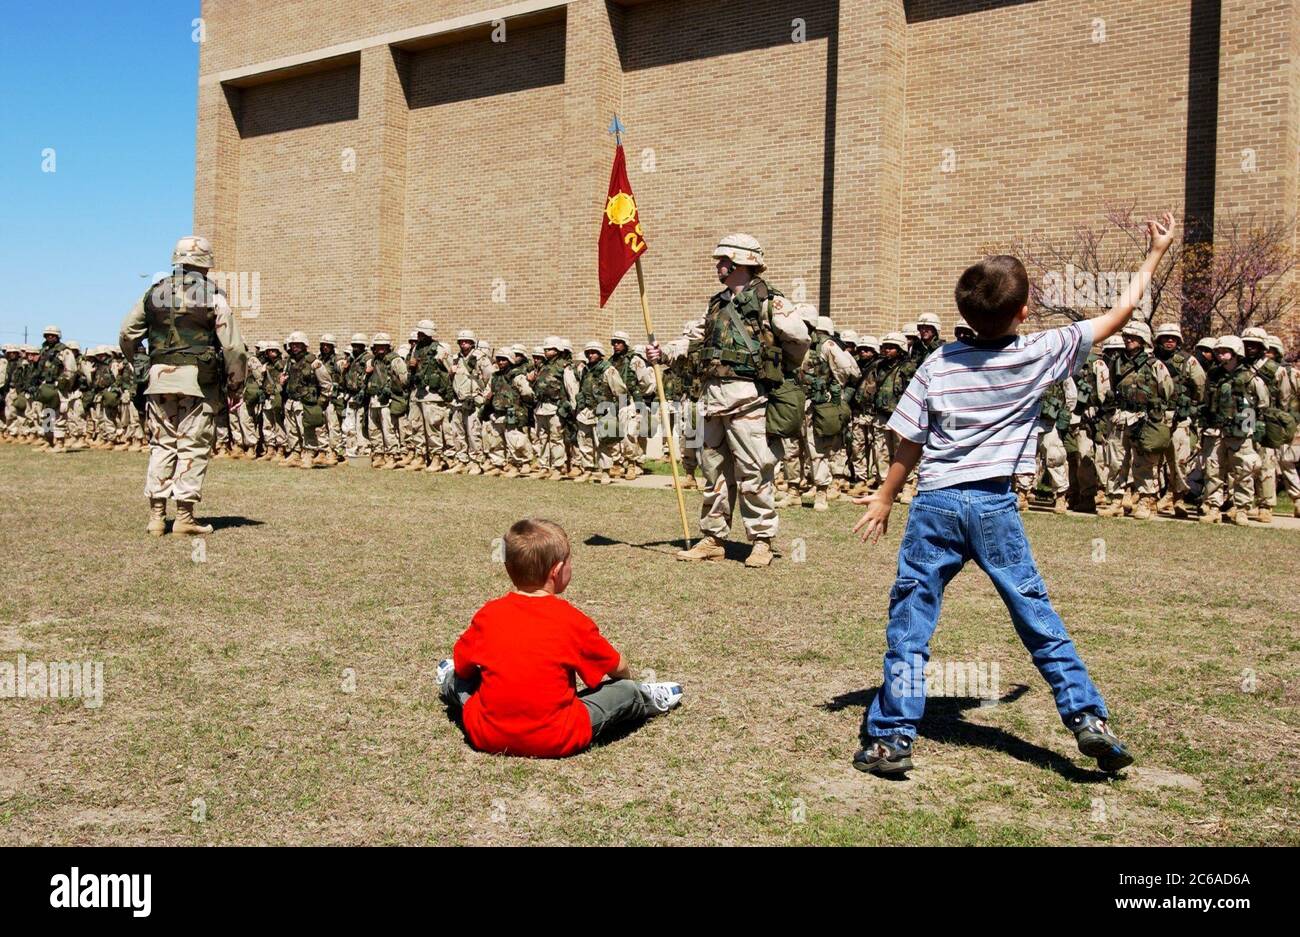 Fort Hood, Texas USA, March 23, 2003: Boys play in the grass as U.S. Army troops of the III Corps 13th Corps Support Command (COSCOM) based at Fort Hood prepare to leave Texas after receiving deployment orders two days earlier. The troops will provide logistical and medical support to fighting units based in the Persian Gulf.  ©Bob Daemmrich Stock Photo